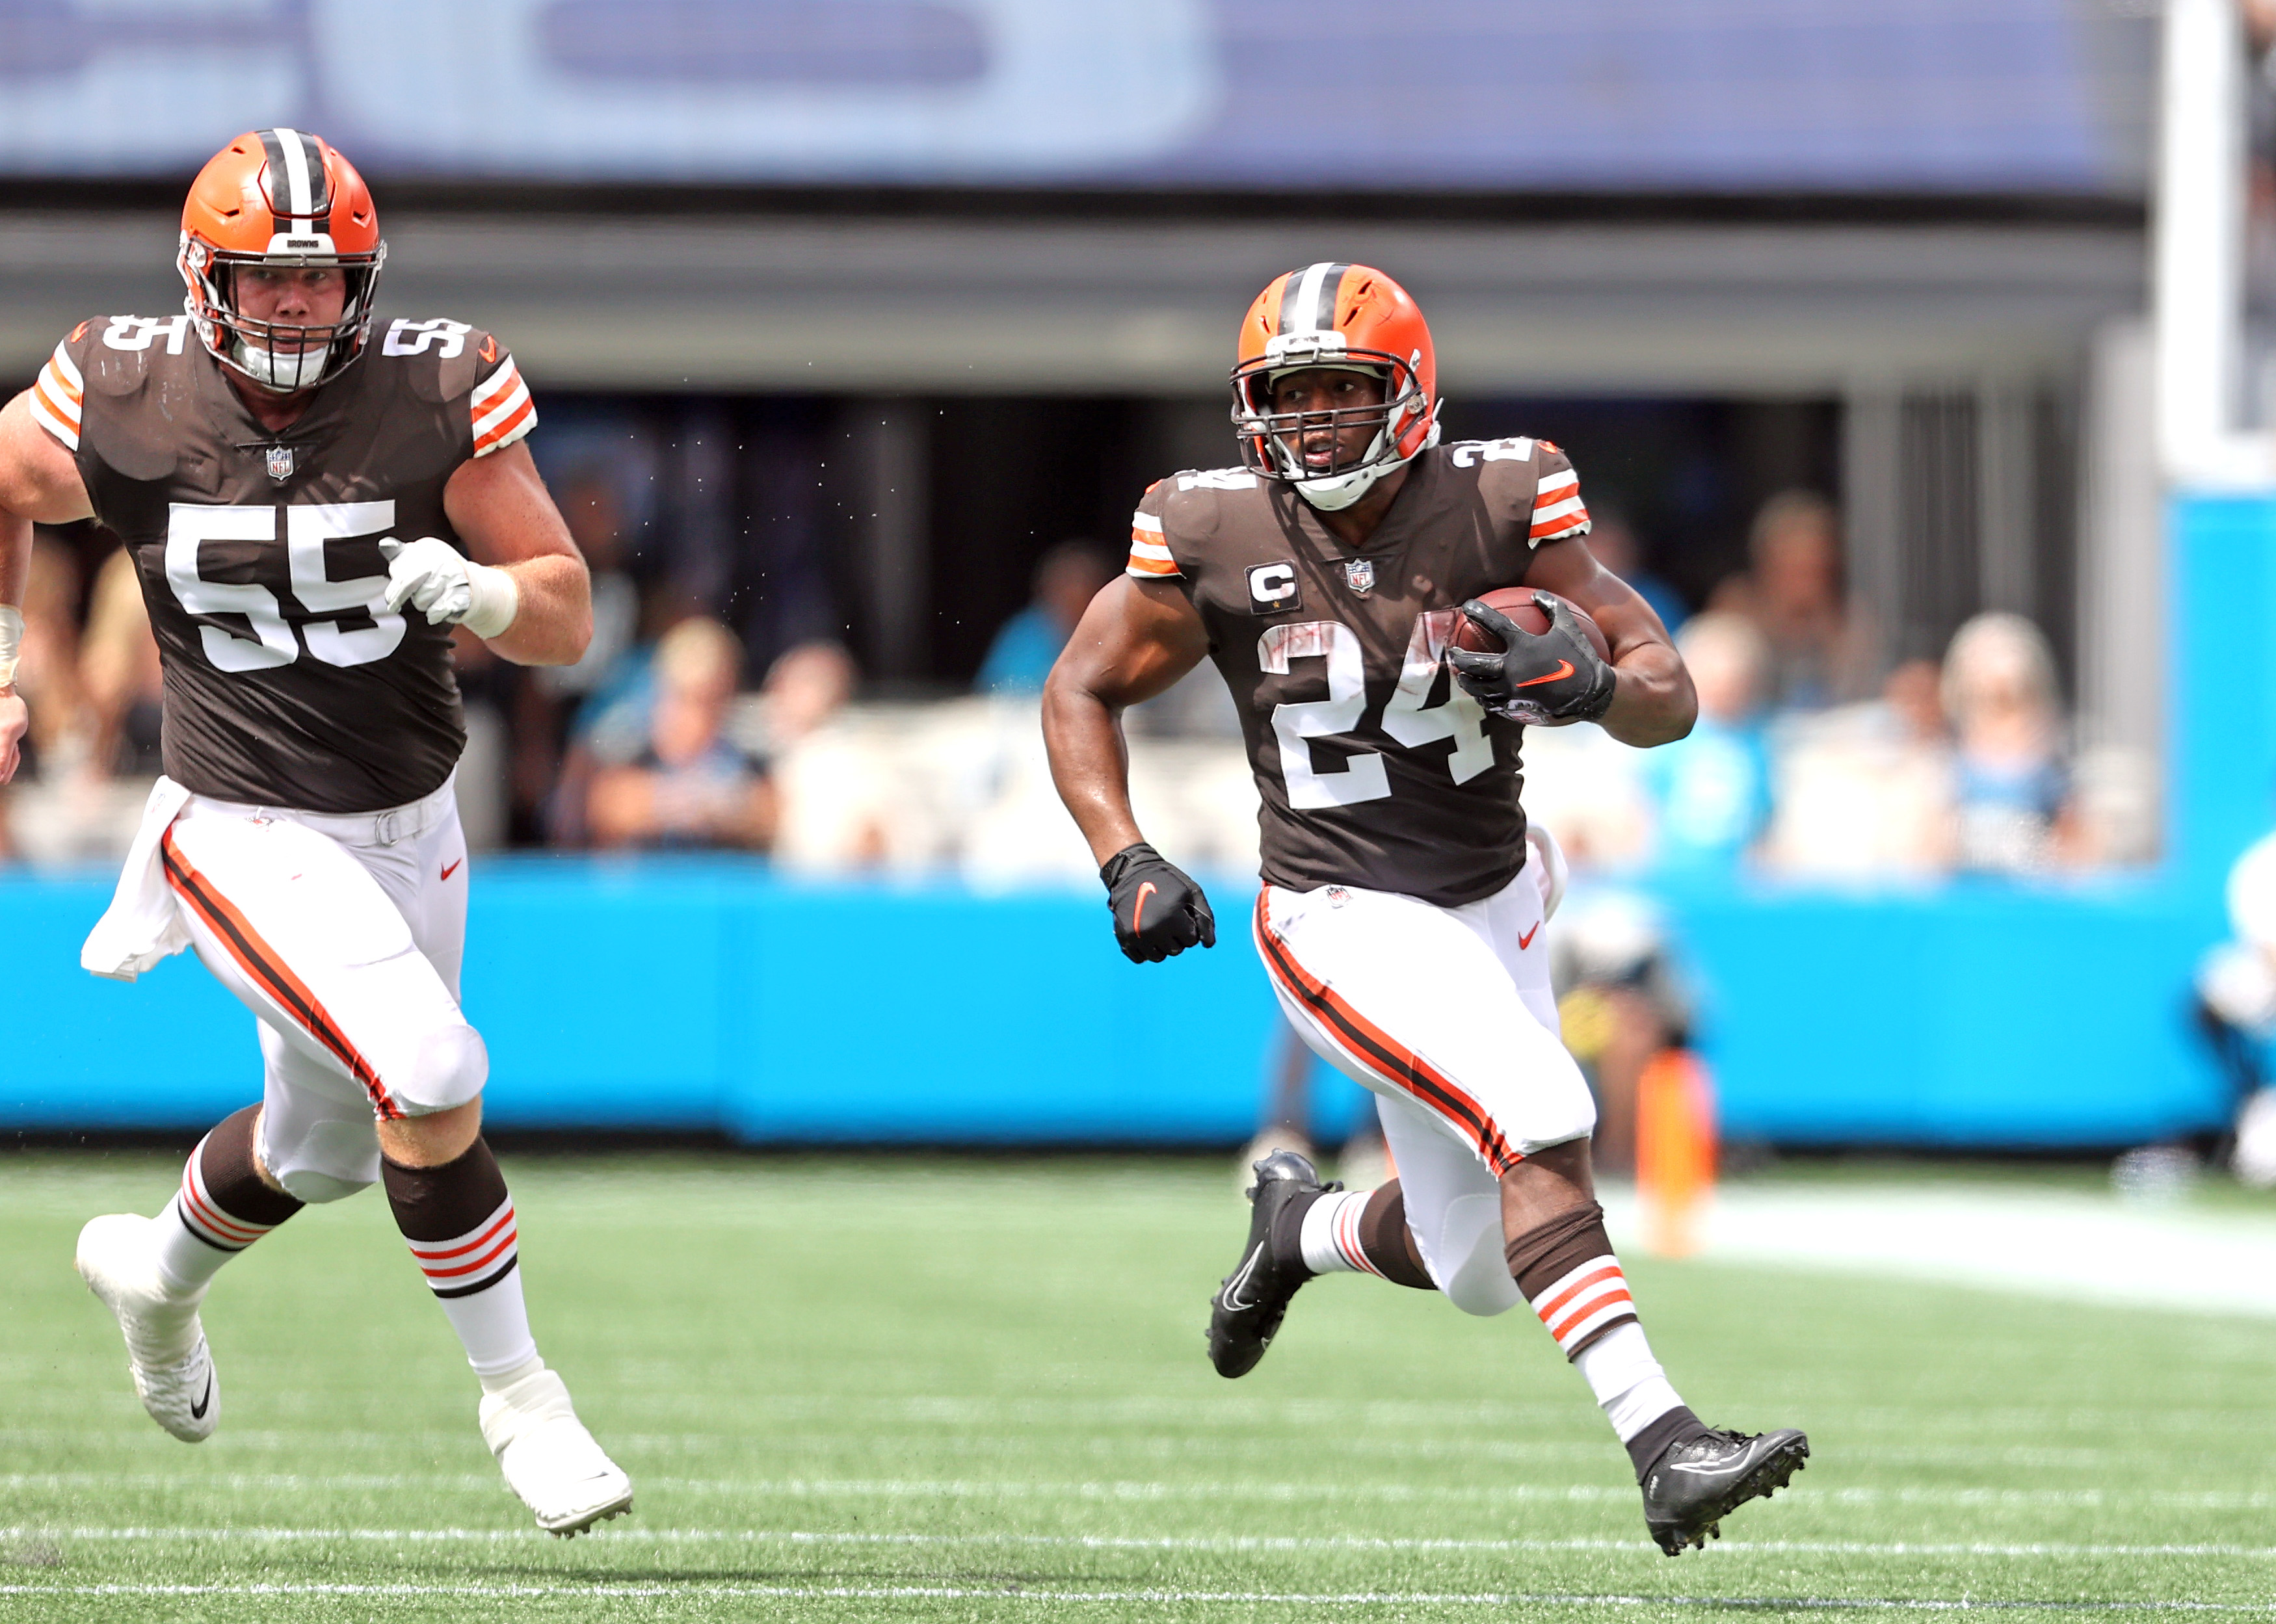 Cleveland Browns running back Nick Chubb (24) runs the ball against the Miami  Dolphins during an NFL football game, Sunday, Nov. 24, 2019, in Cleveland.  The Browns won the game 41-24. (Jeff